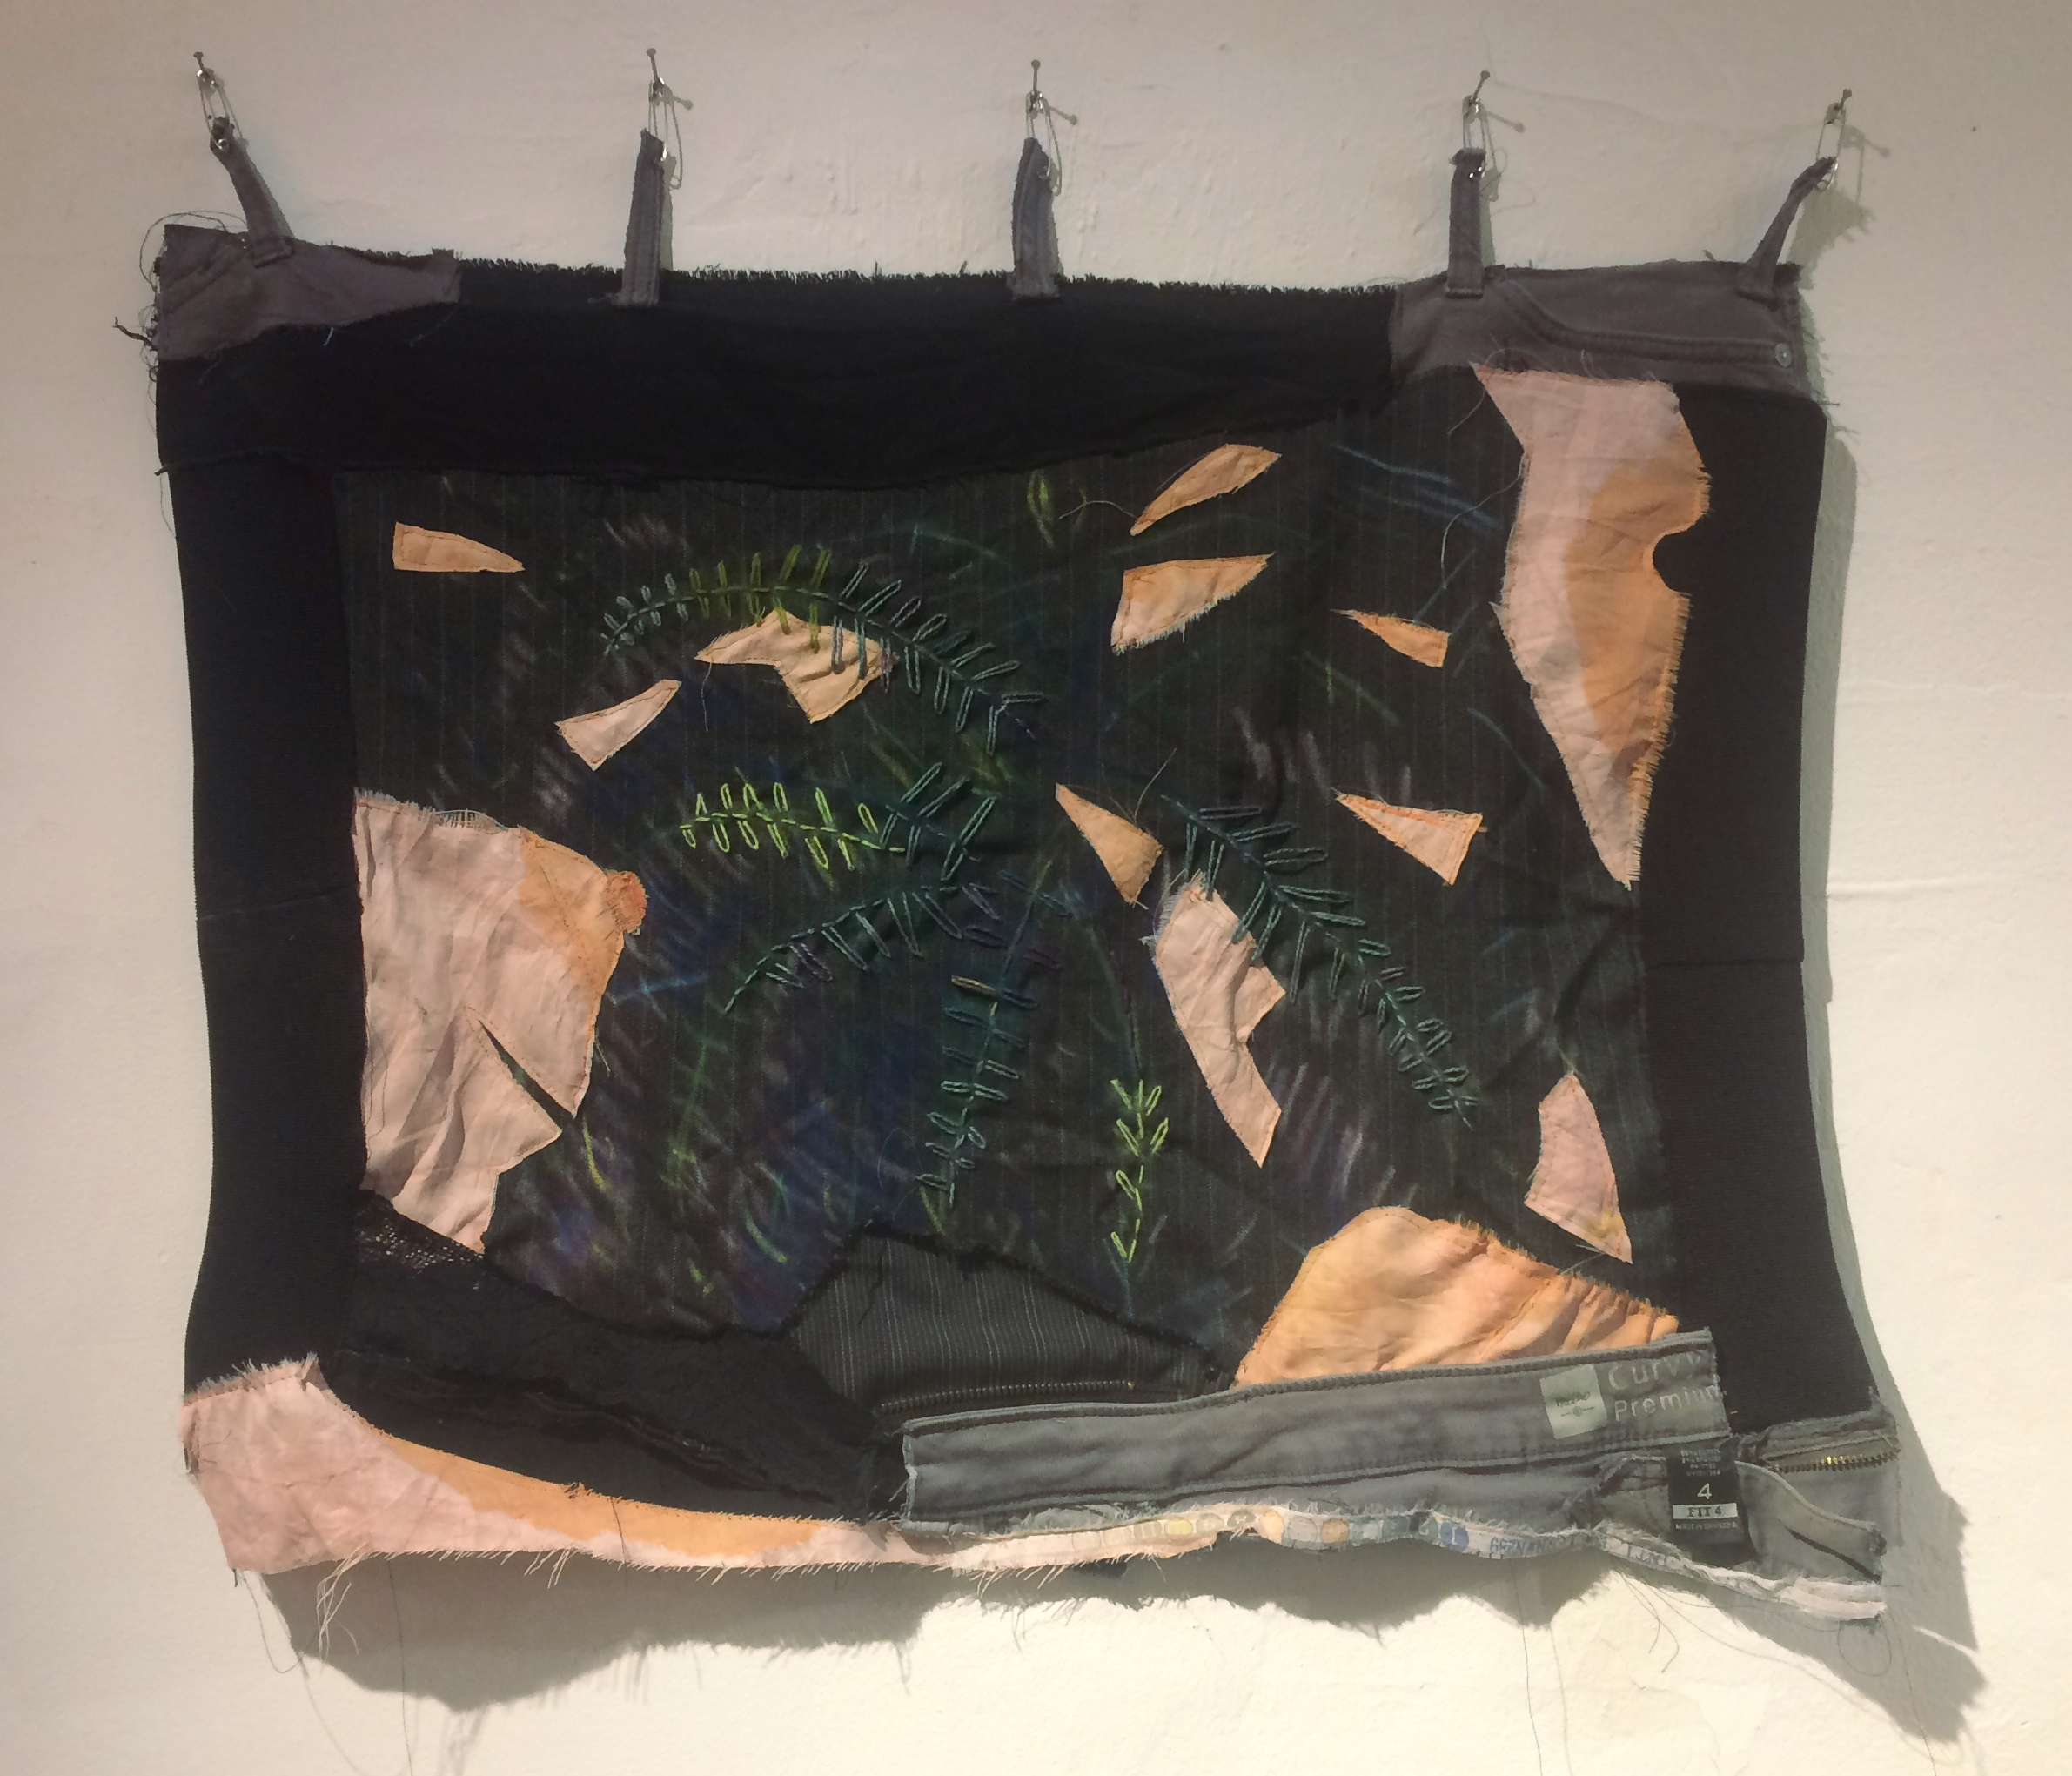 Secret fern, dyed fabric, pieces of my jeans, and embroidery, 2017